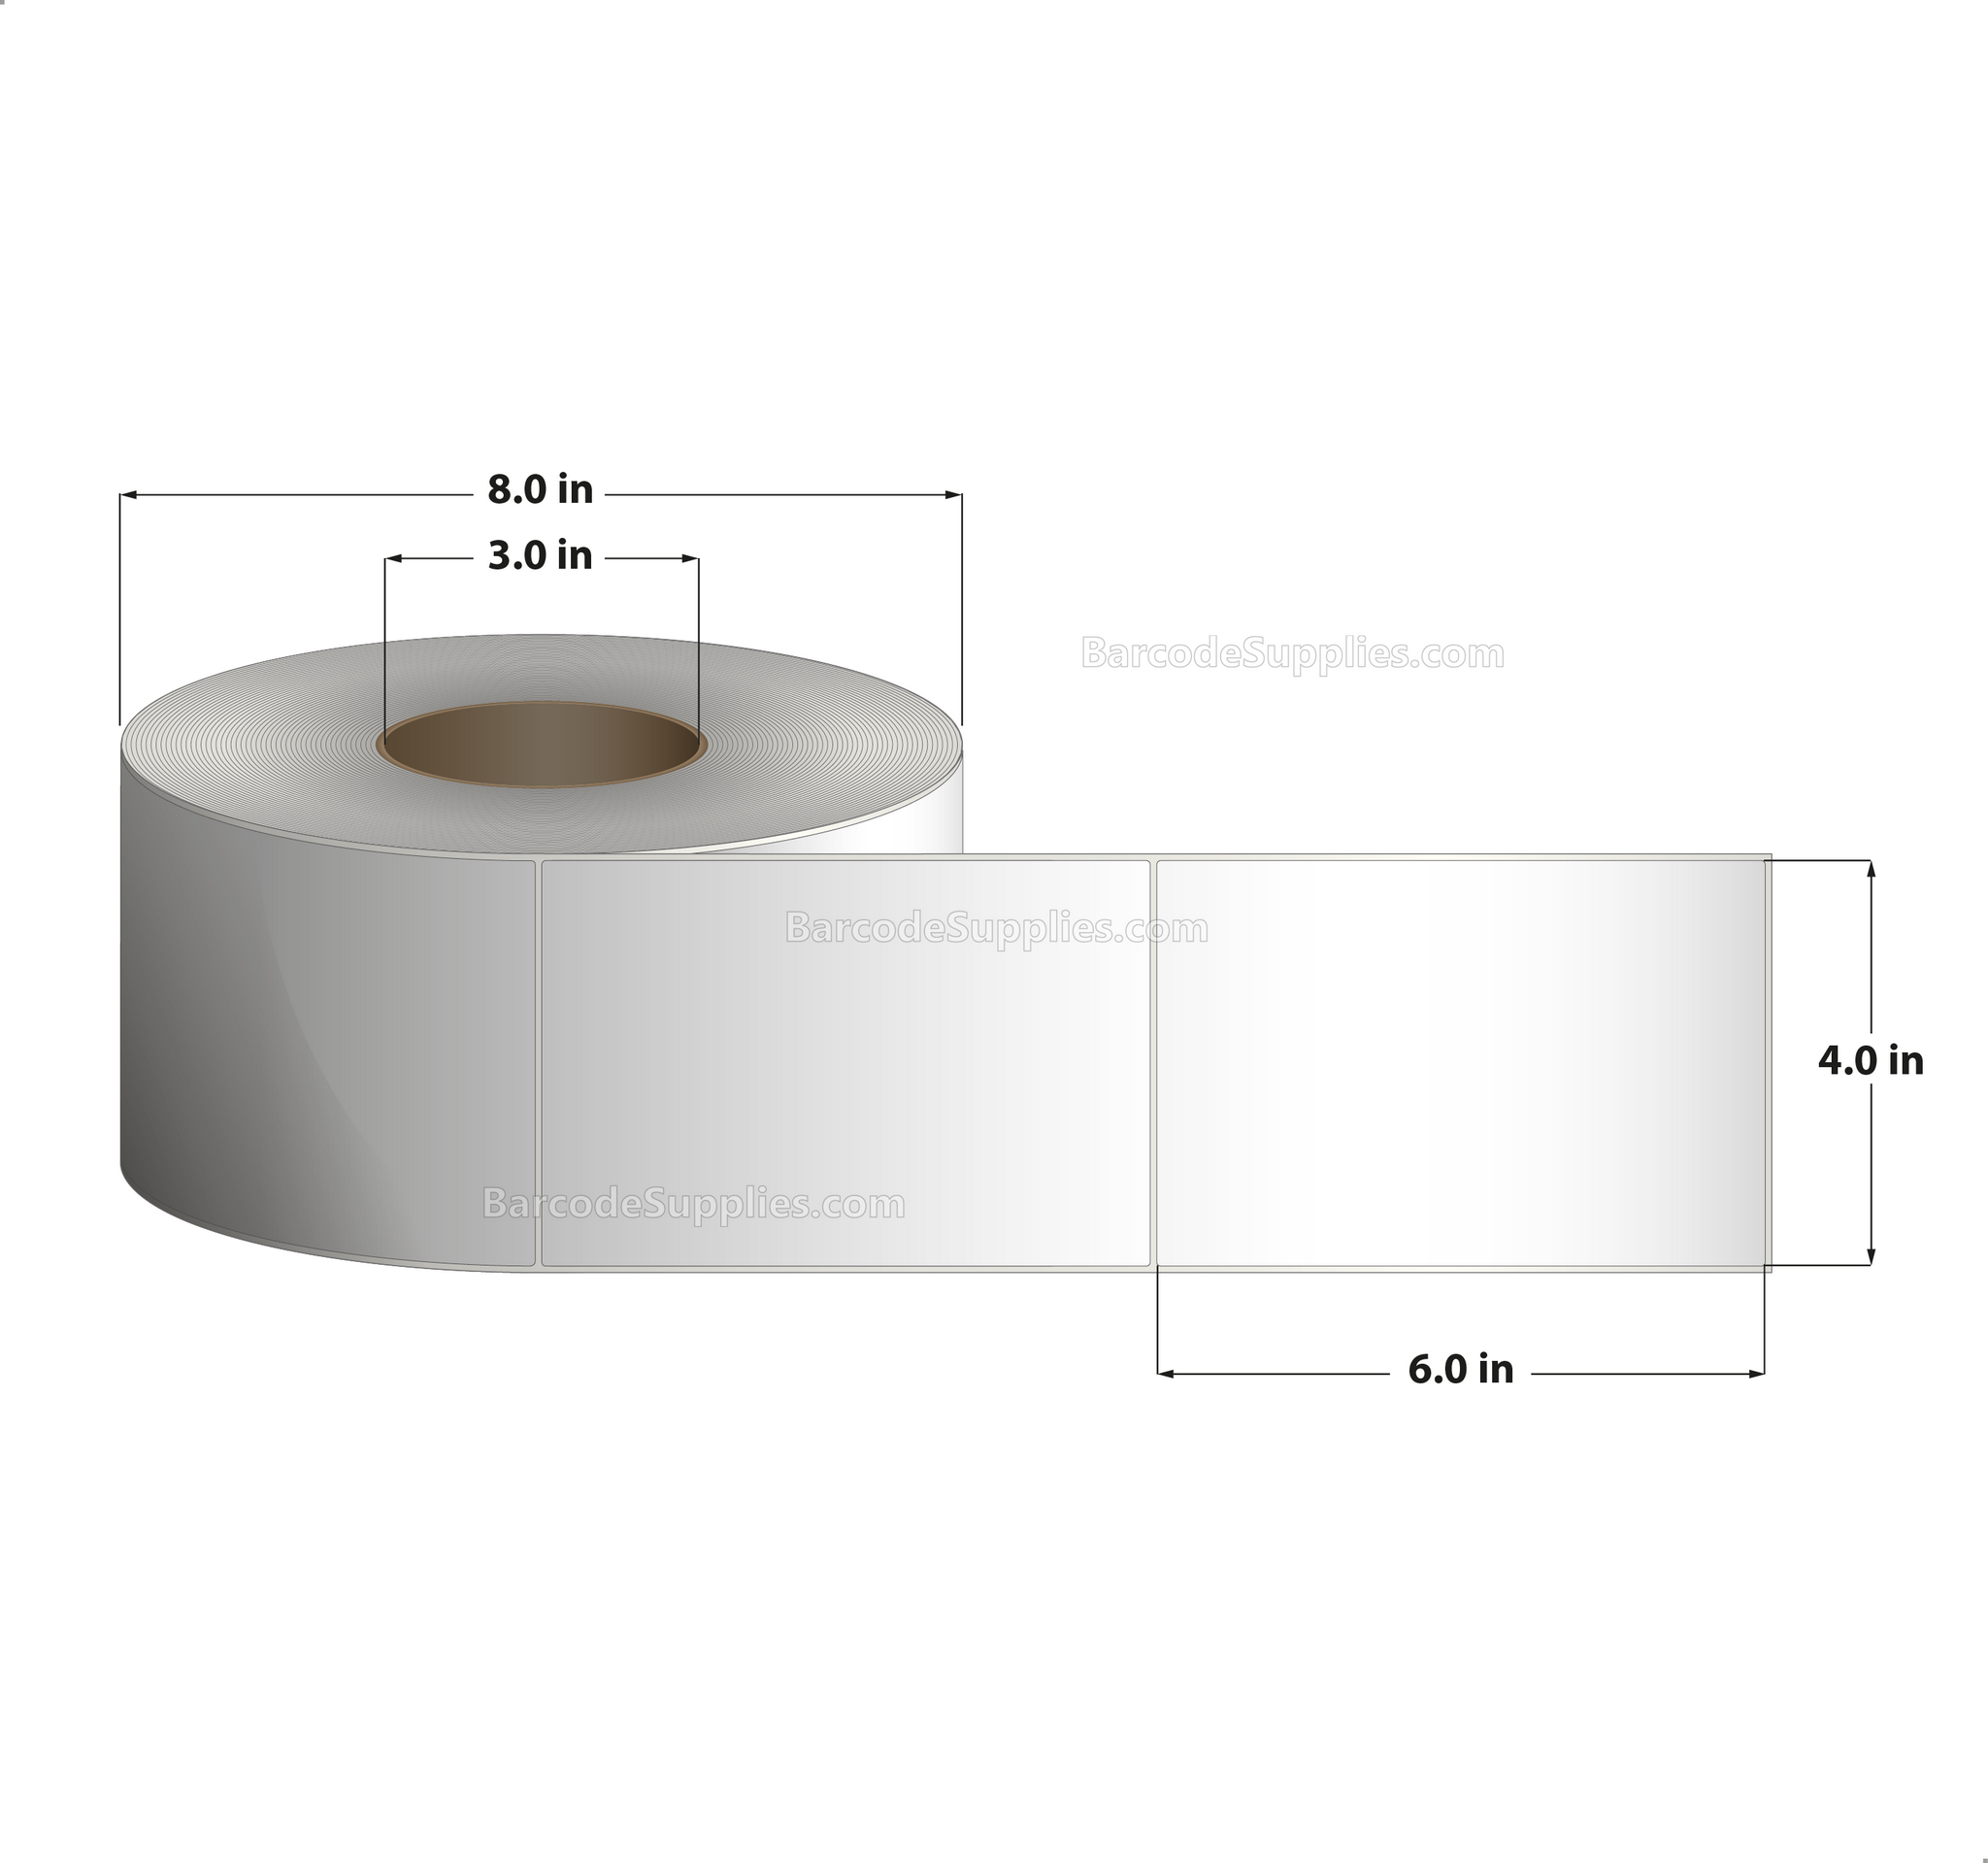 4 x 6 Thermal Transfer White Labels With Permanent Acrylic Adhesive - Not Perforated - 1000 Labels Per Roll - Carton Of 4 Rolls - 4000 Labels Total - MPN: TH46-1